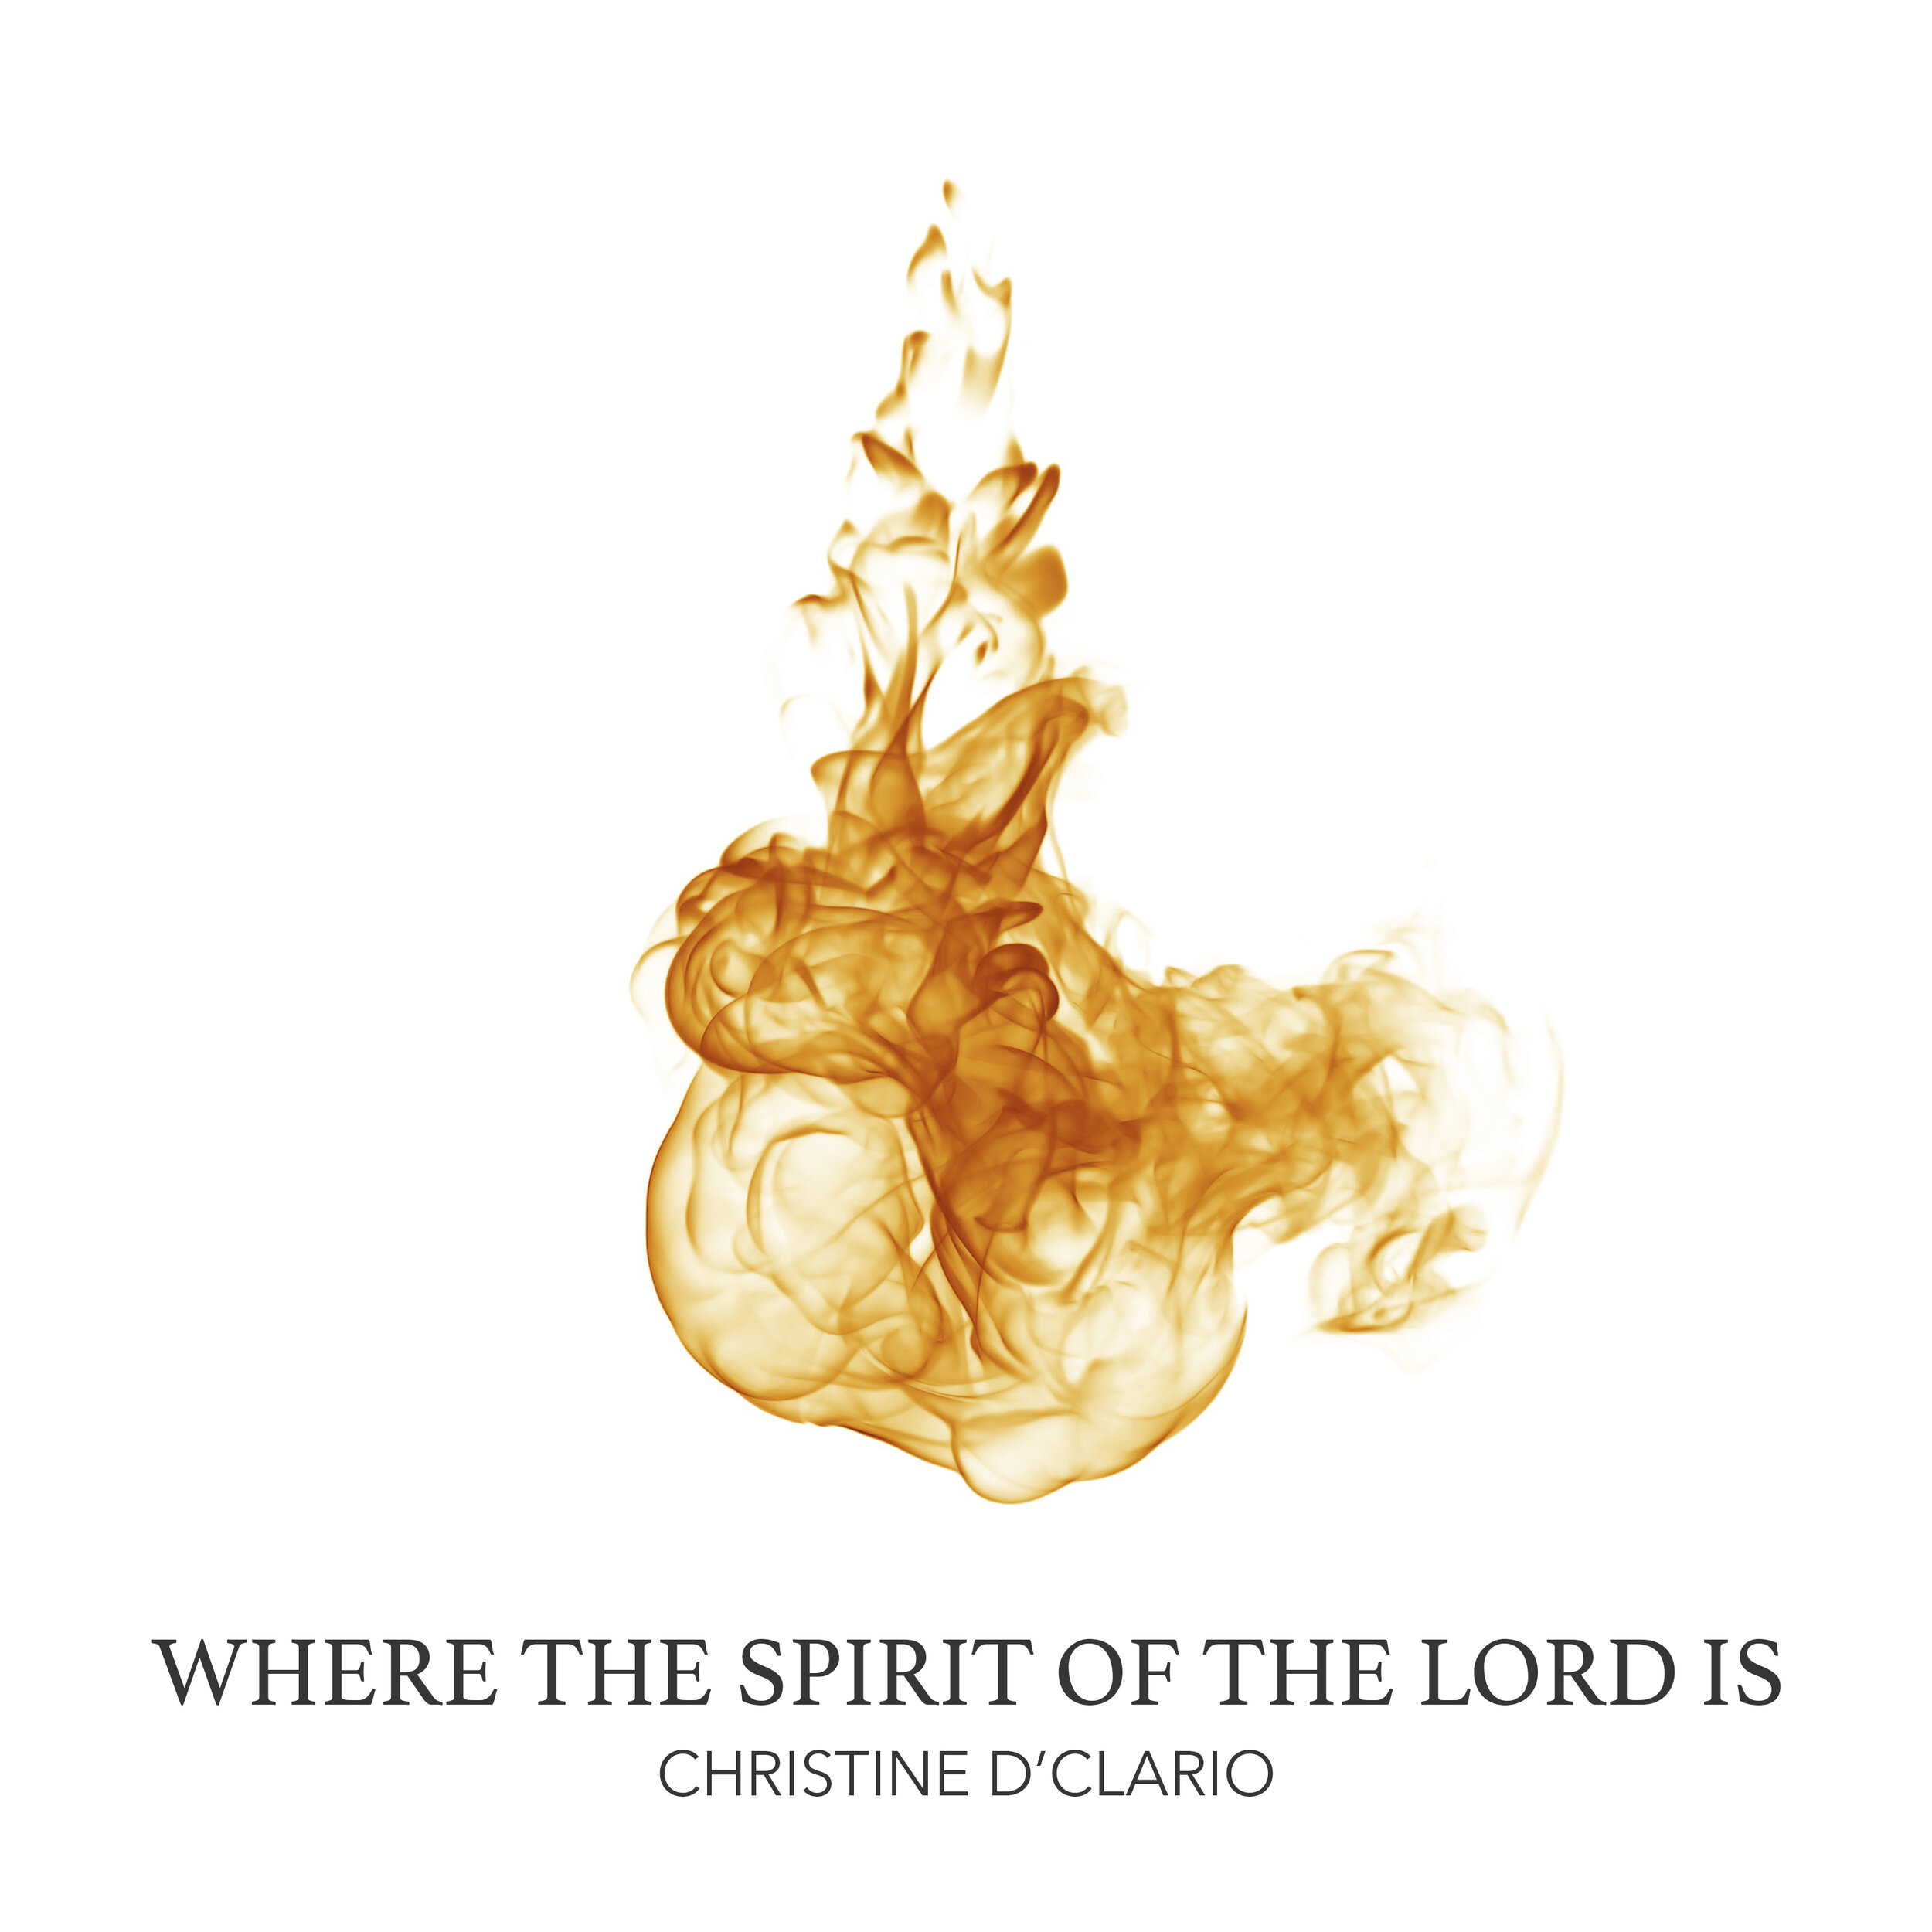 Where The Spirit Of The Lord Is